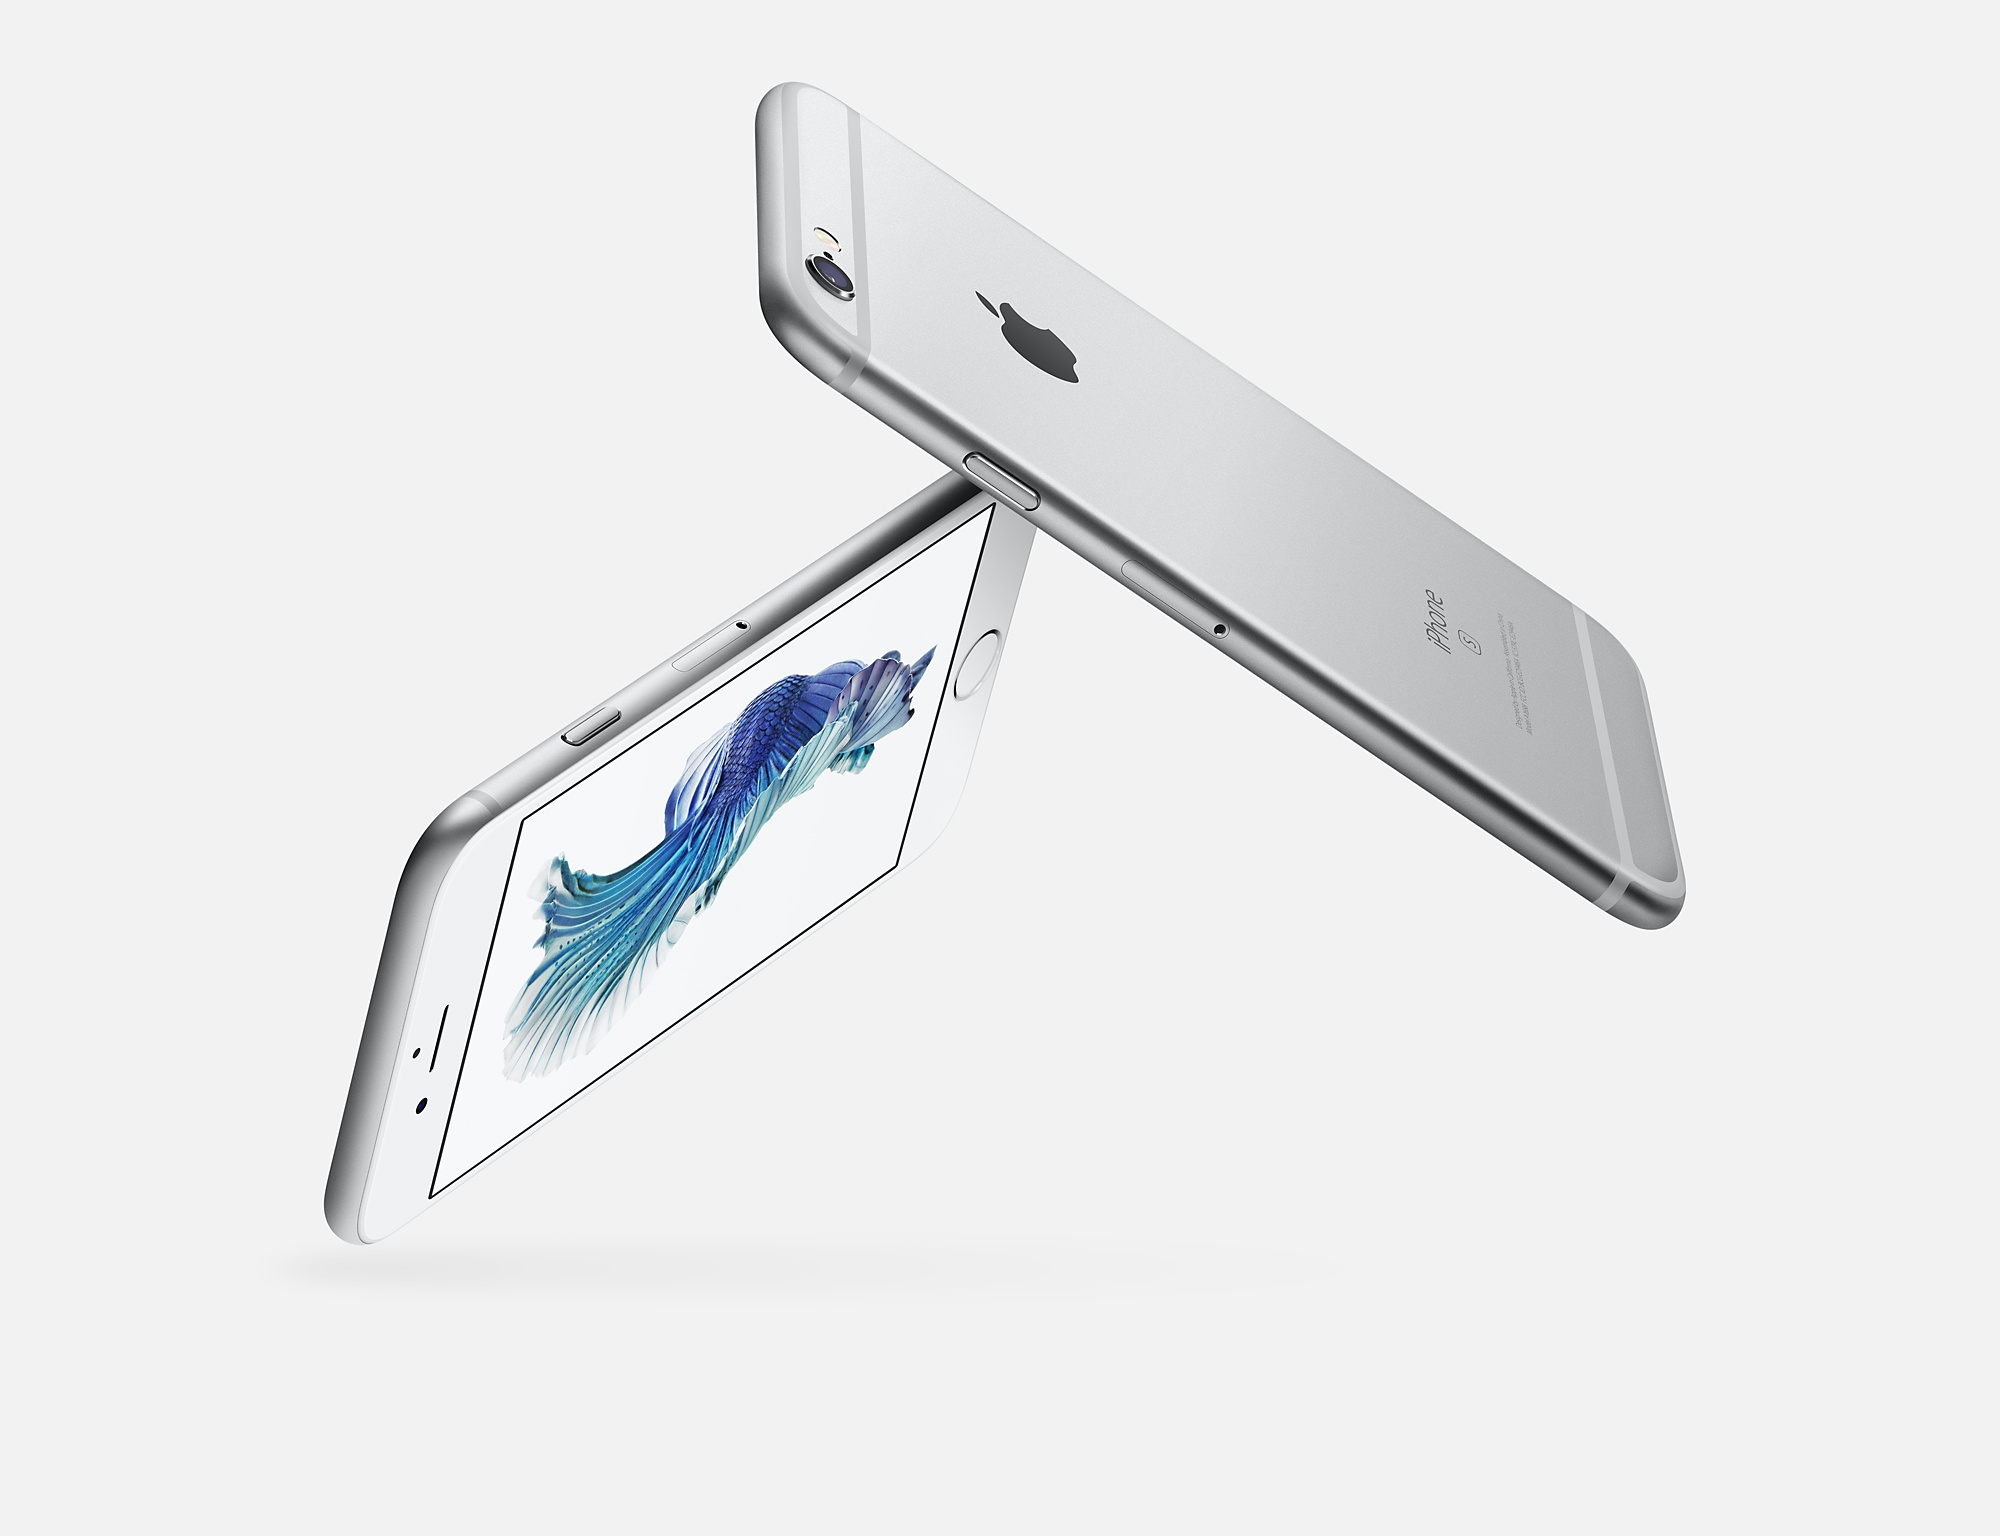 Buy iPhone 6s and iPhone 6s Plus - Apple